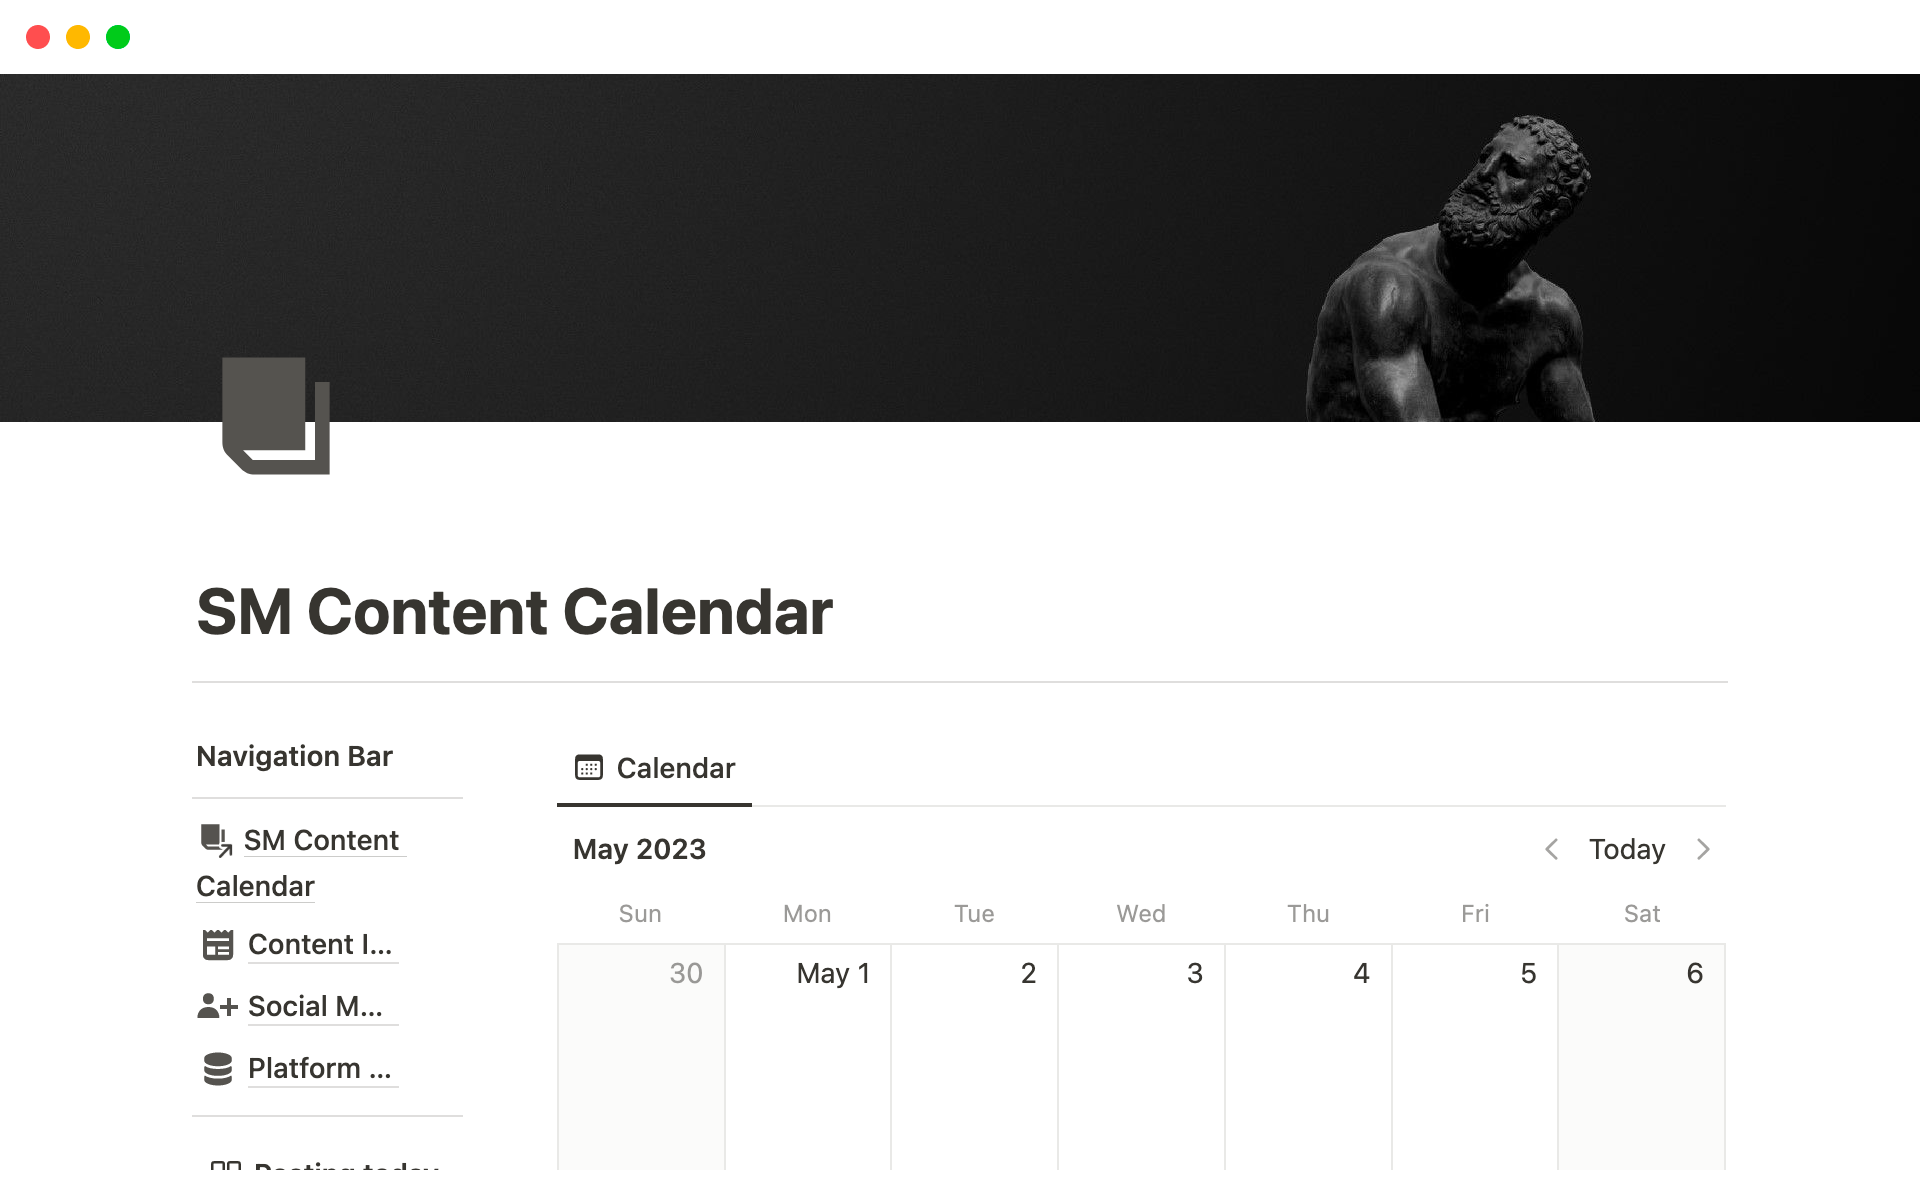 This template helps transform of your content ideas into a visually appealing and easily navigable calendar, streamlining content planning and collaboration between social media managers/agencies and their clients.